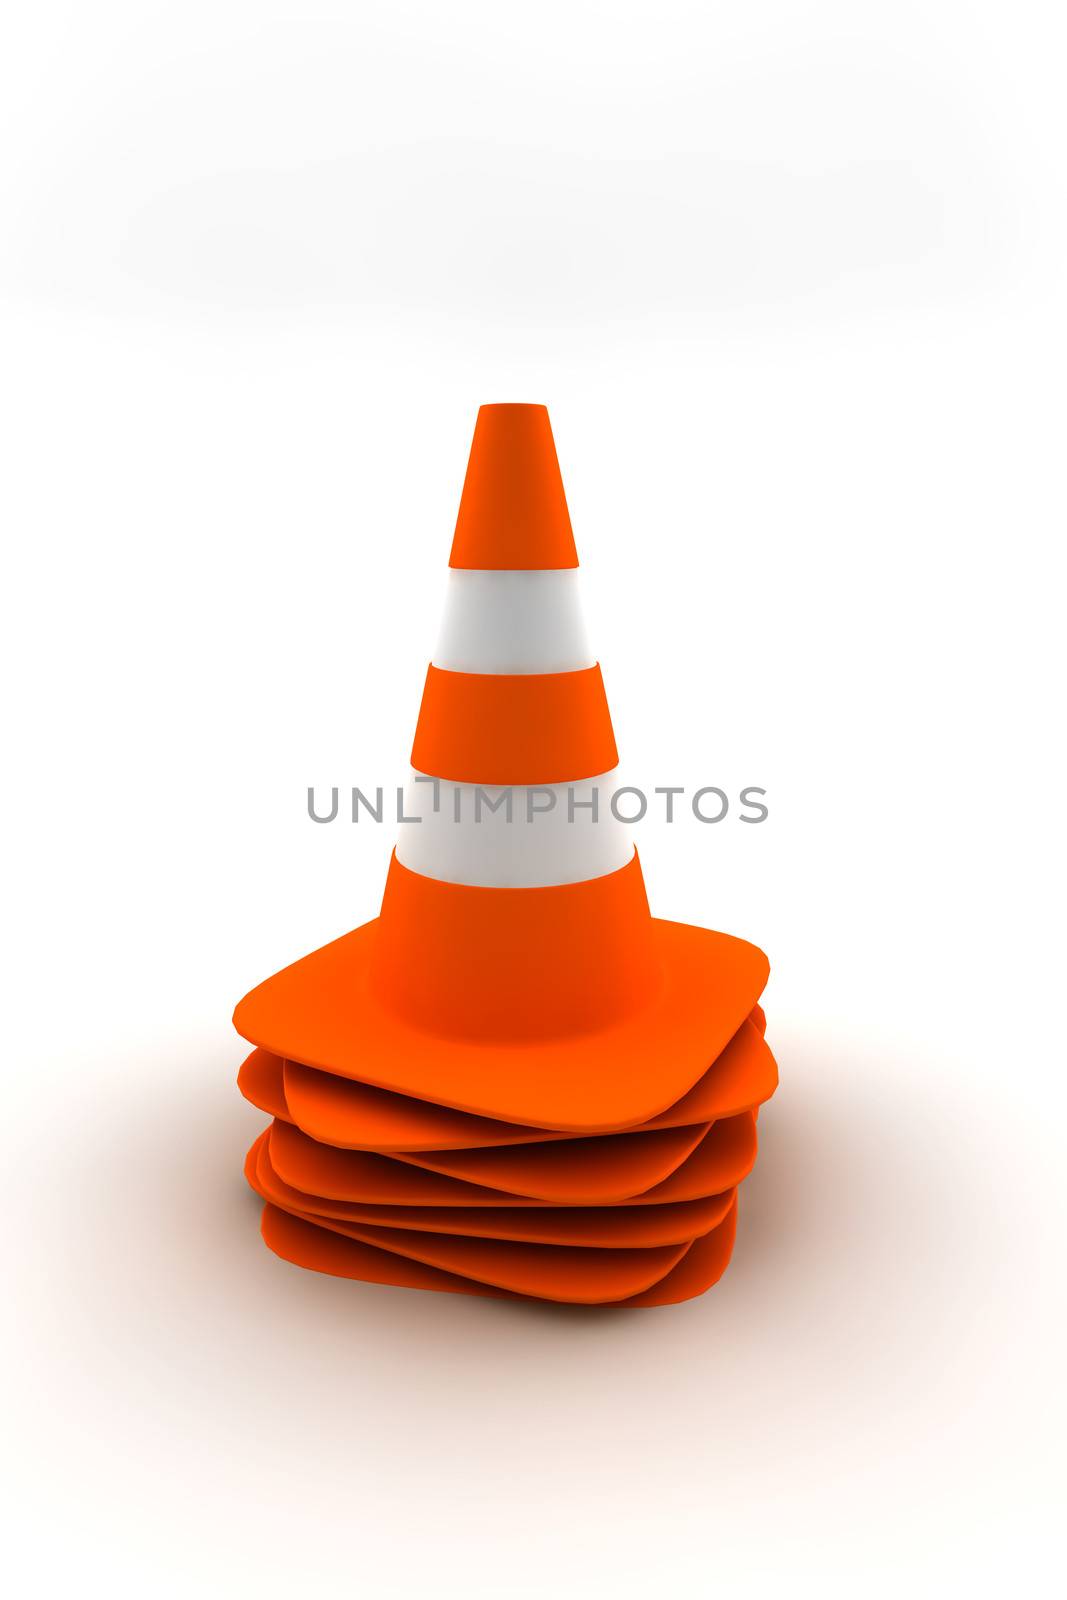 Many traffic cones on a pile